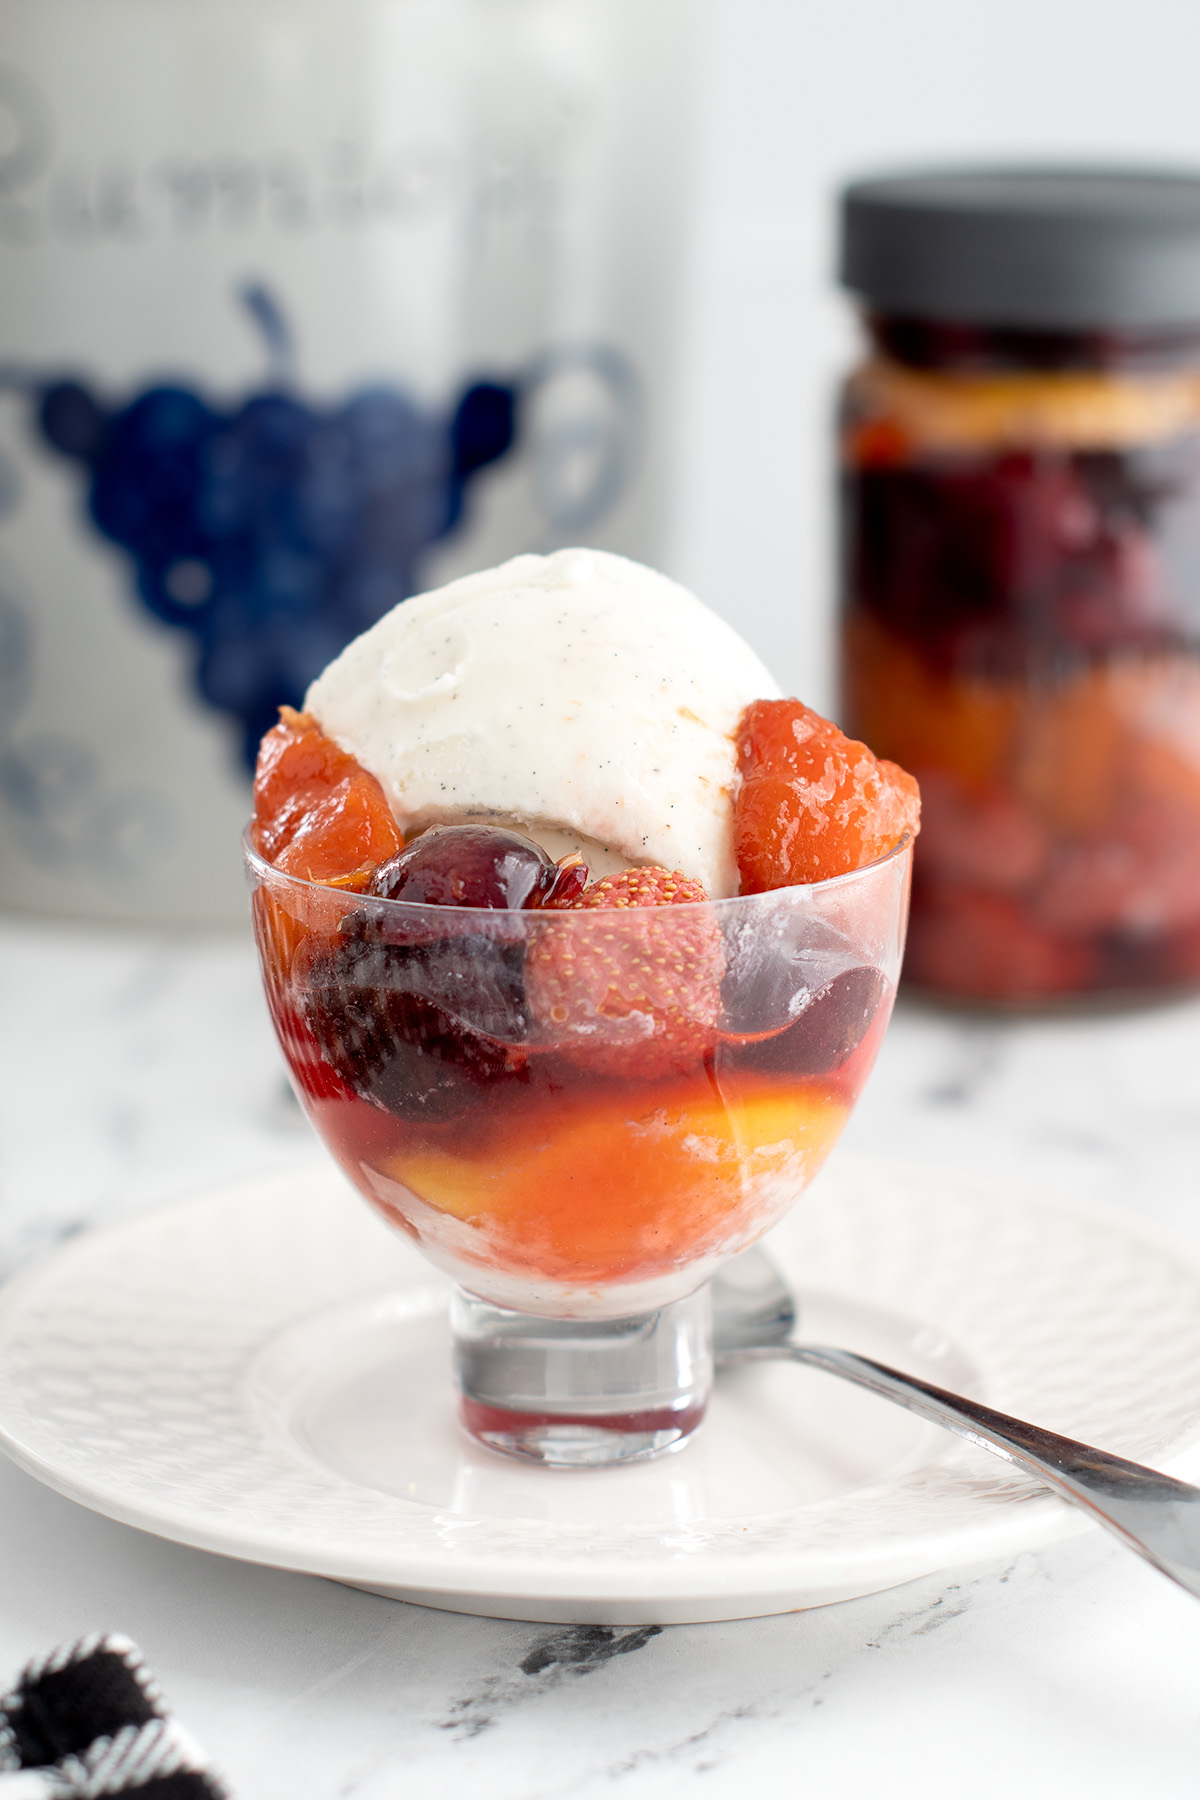 a glass bowl filled with ice cream and fruit.